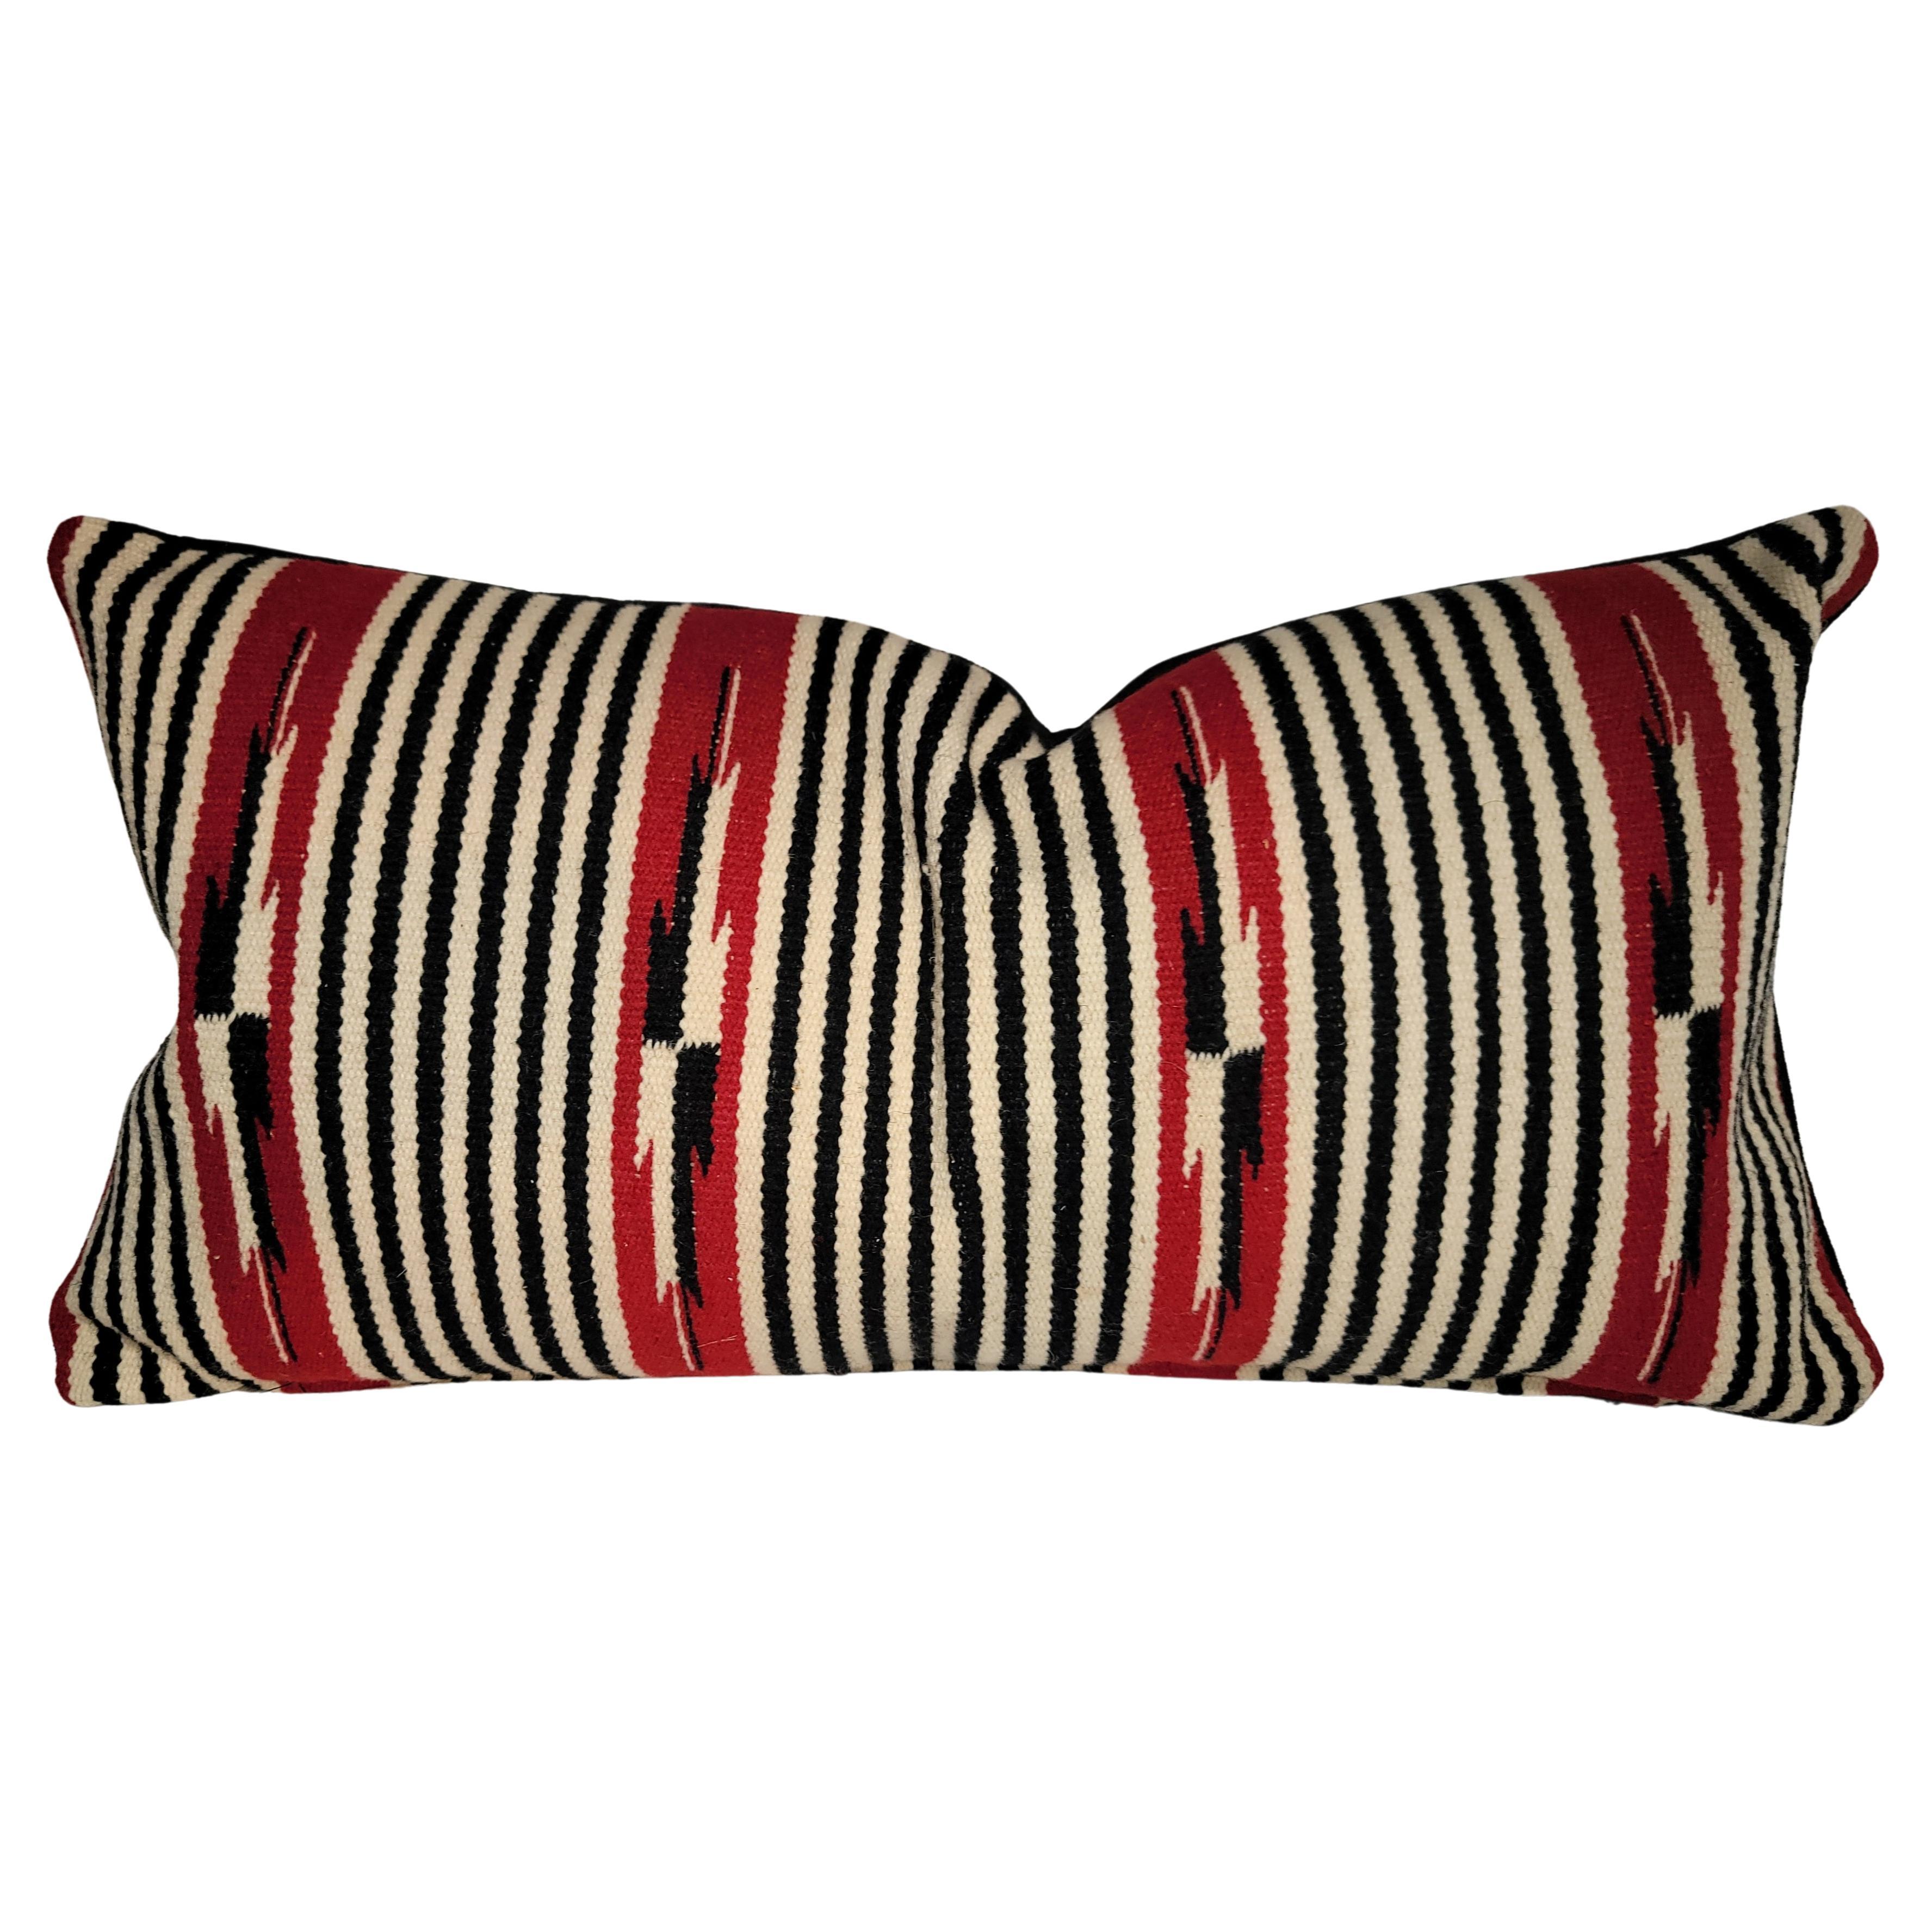 Navajo Indian Weaving Pillow With Suede Backing